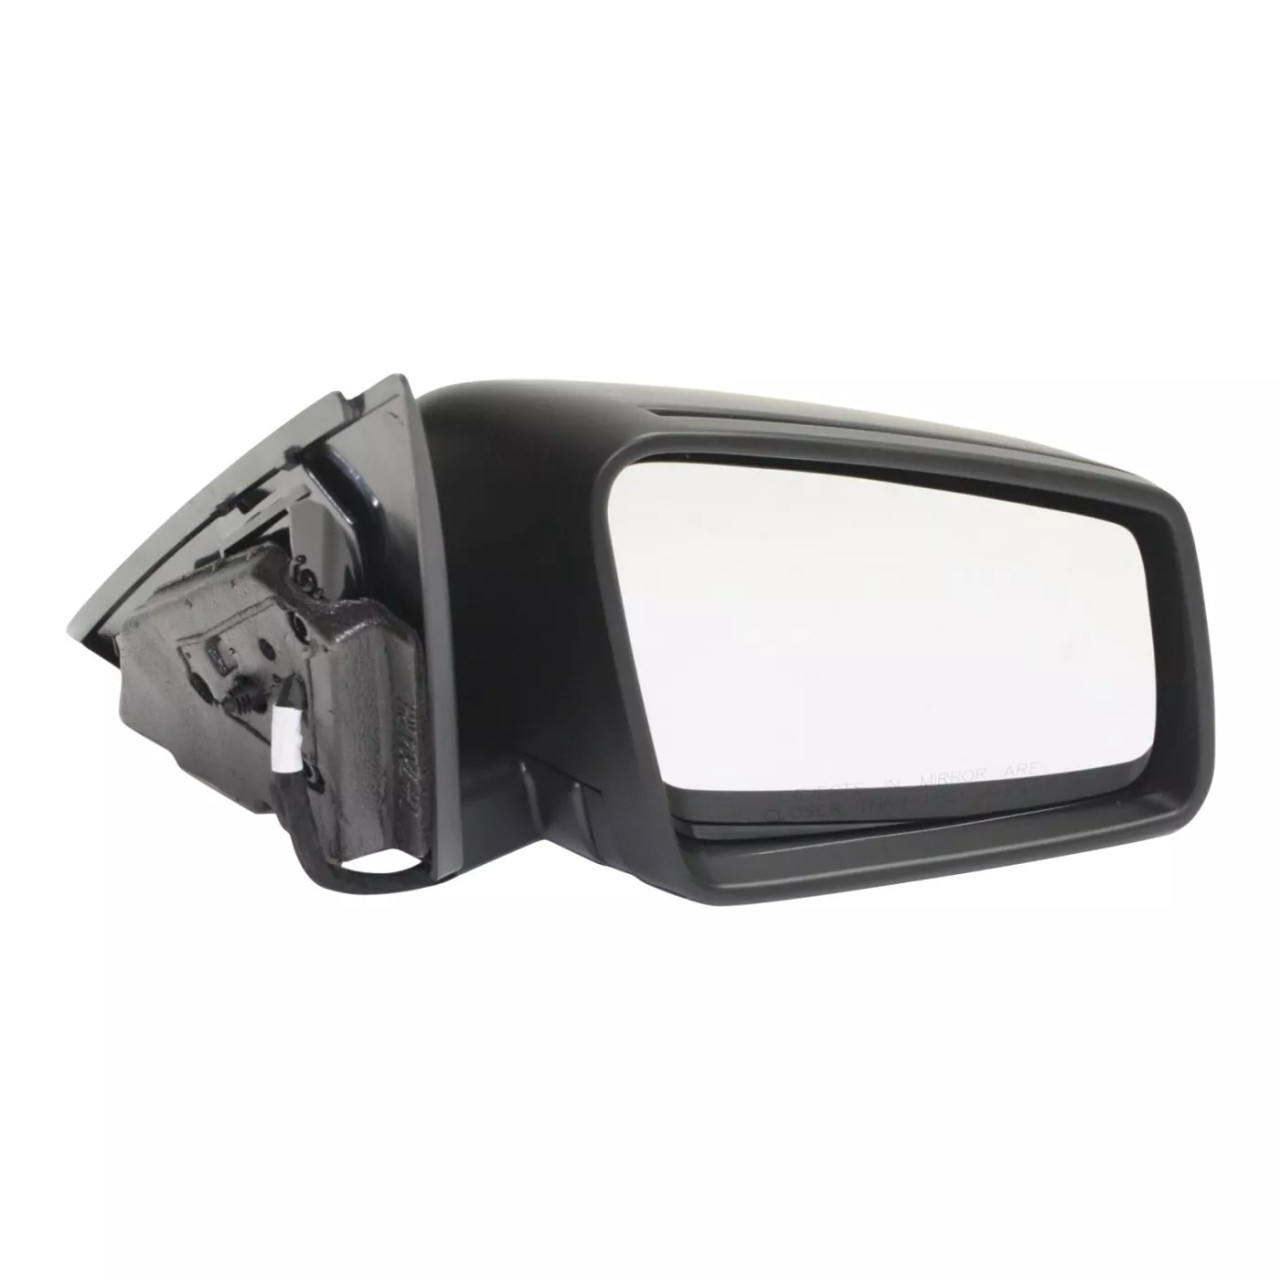 Power Mirror Set For 2012-2014 Mercedes Benz C250 Heated With Puddle Light Sedan